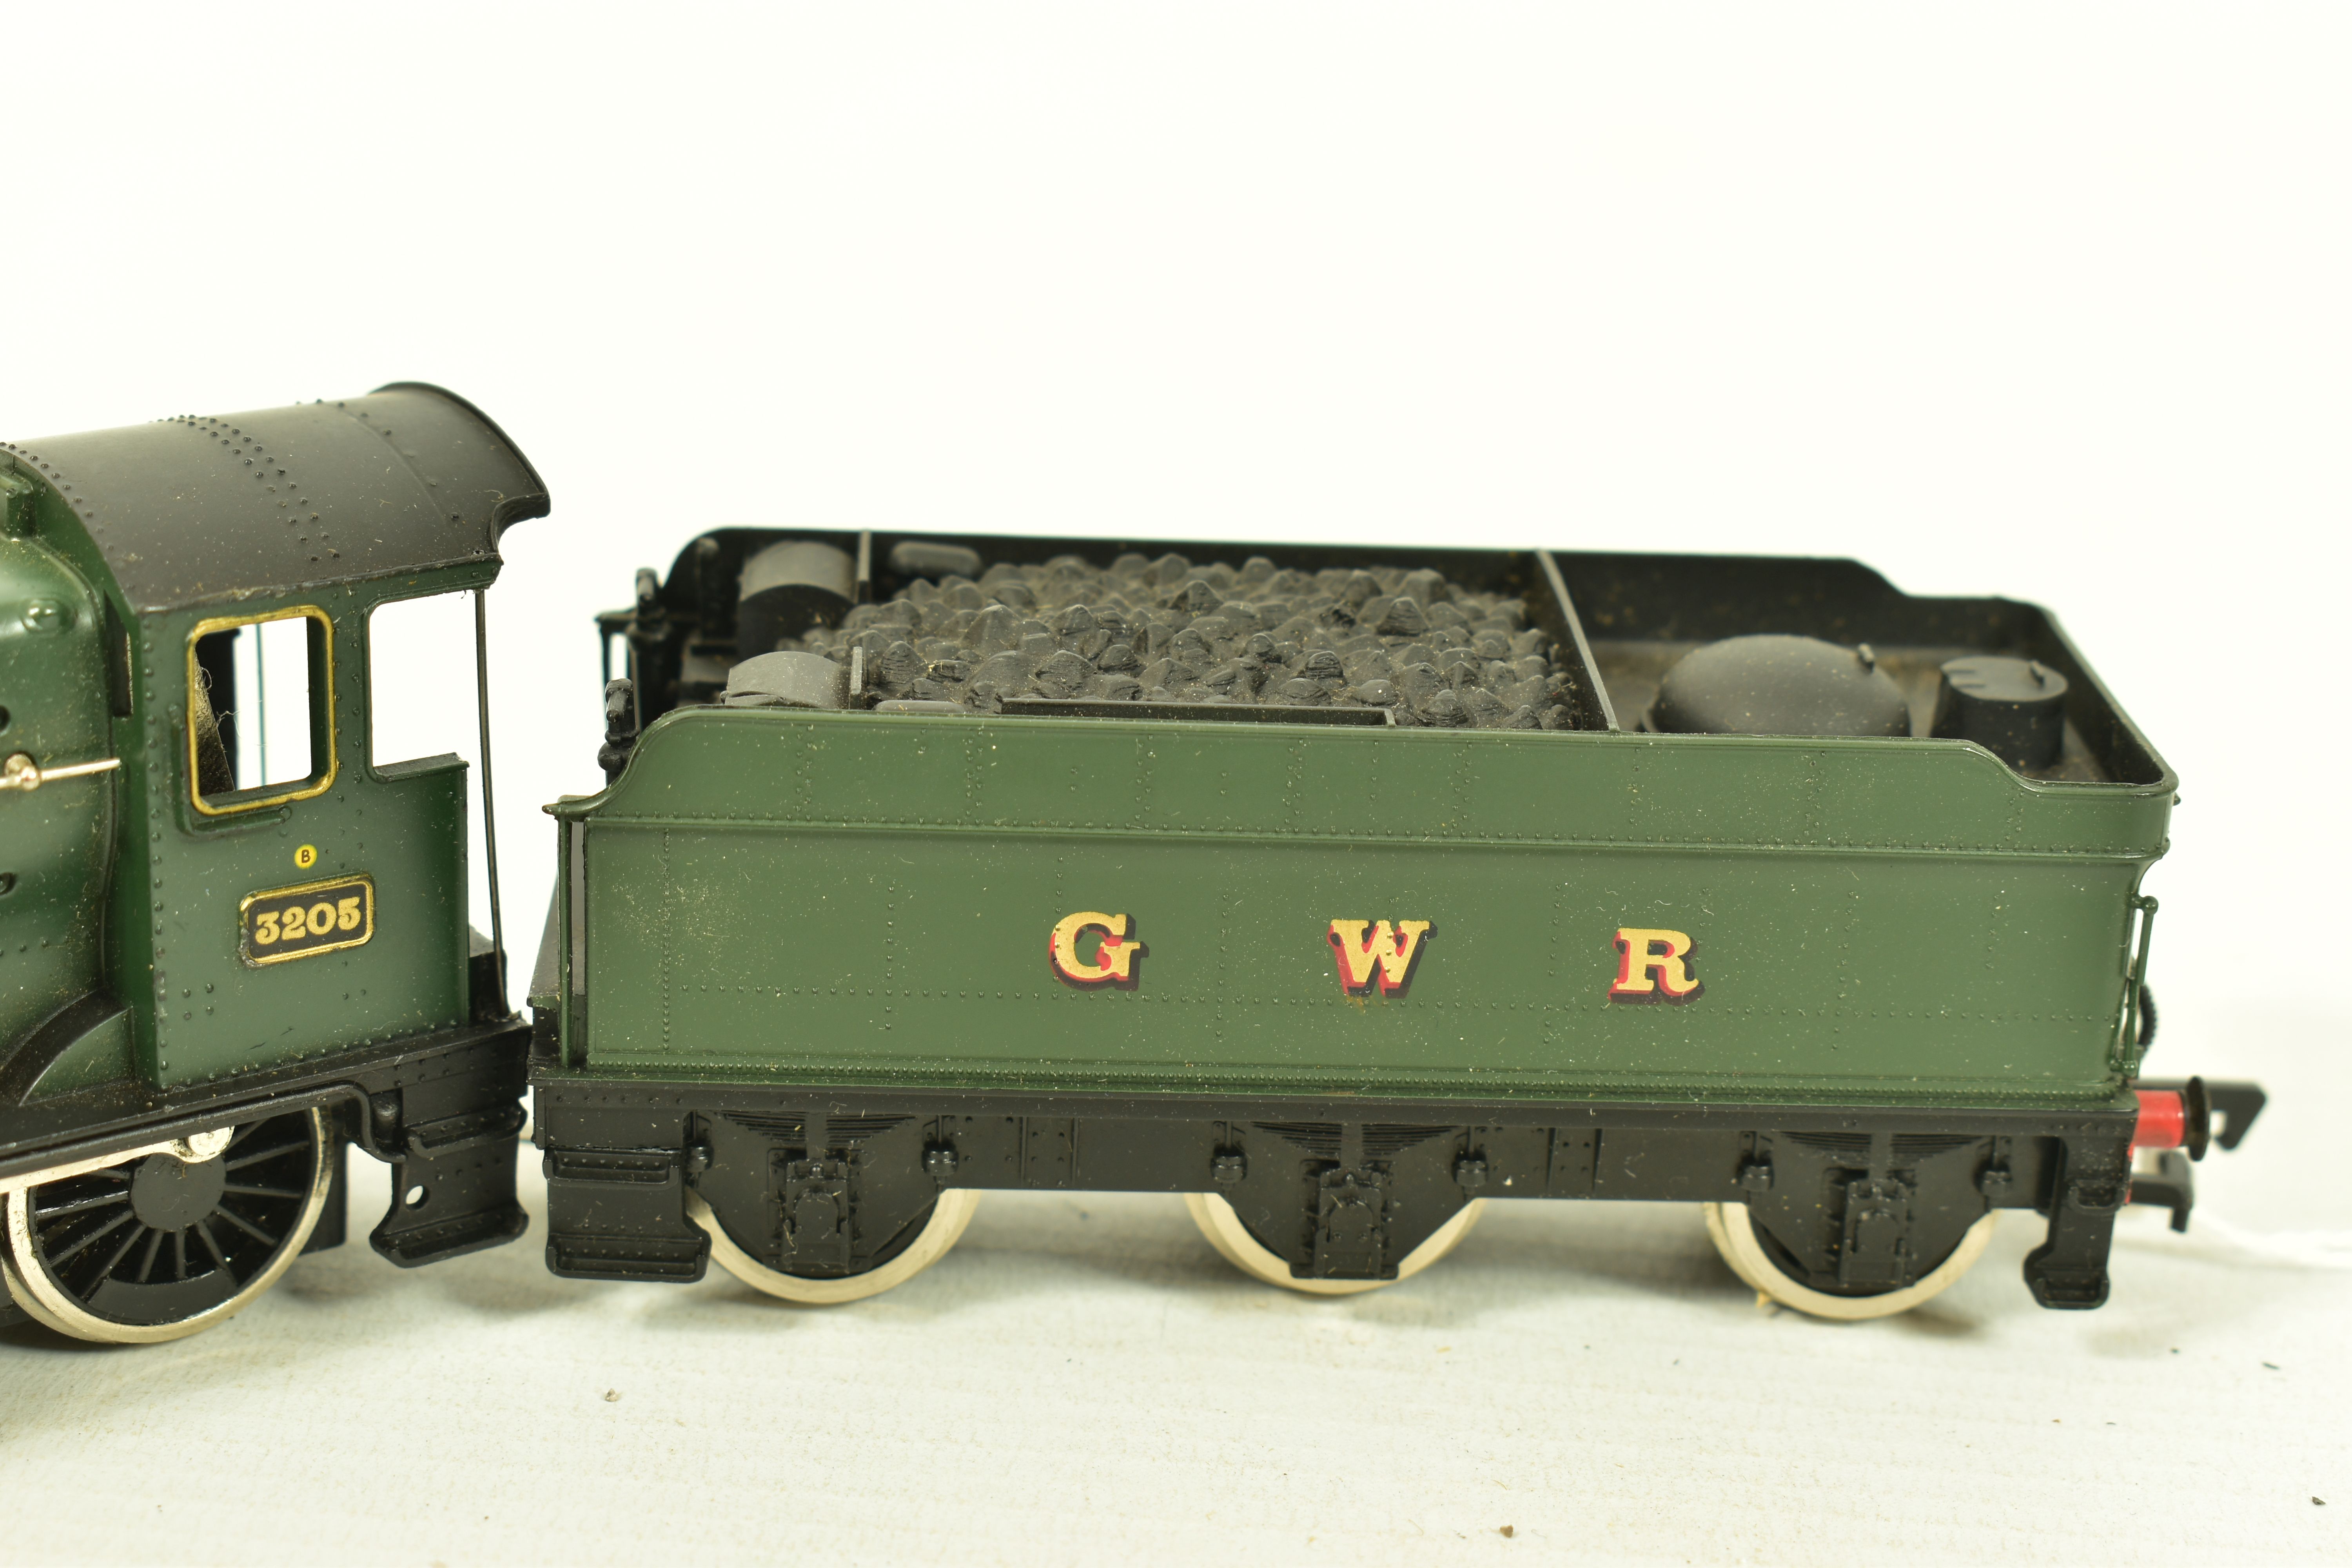 FOUR BOXED MAINLINE OO GAUGE COLLETT GOODS LOCOMOTIVES, 2 x No.3205, G.W.R. green livery (37 058), - Image 9 of 9